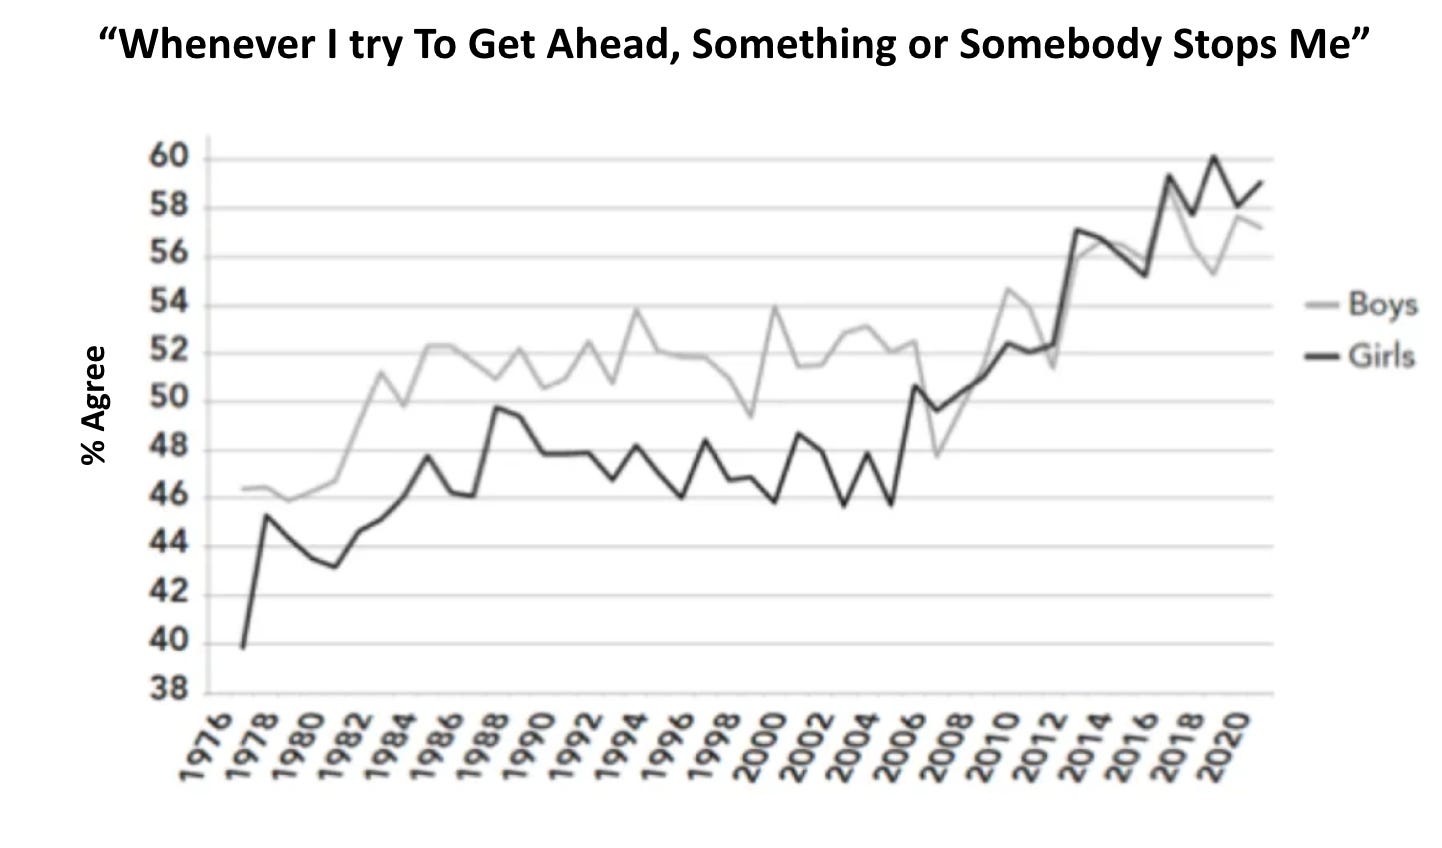 Percentage of boys and girls (high school seniors) who agree with the statement “Every time I try to get ahead, something or somebody stops me.” Increases begin in 2009.